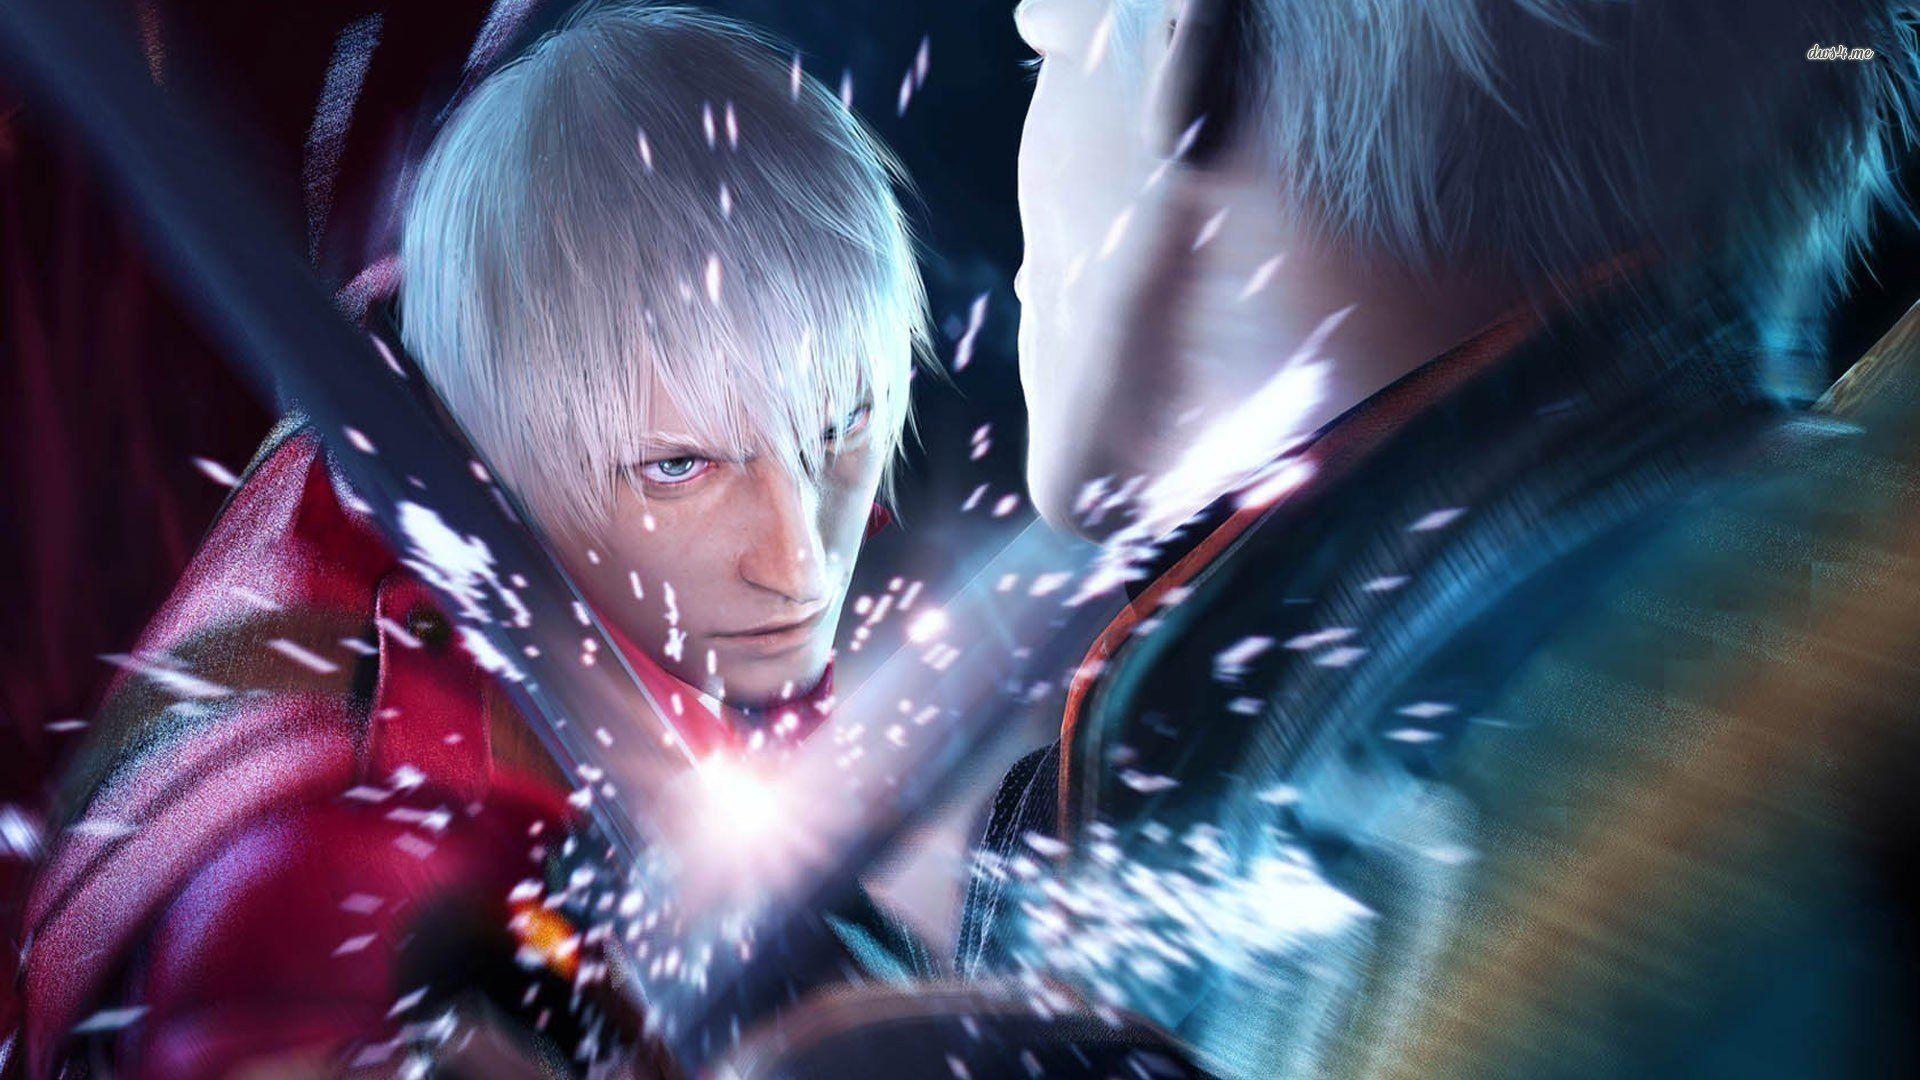 Devil May Cry 3 Wallpapers HD - Wallpaper Cave